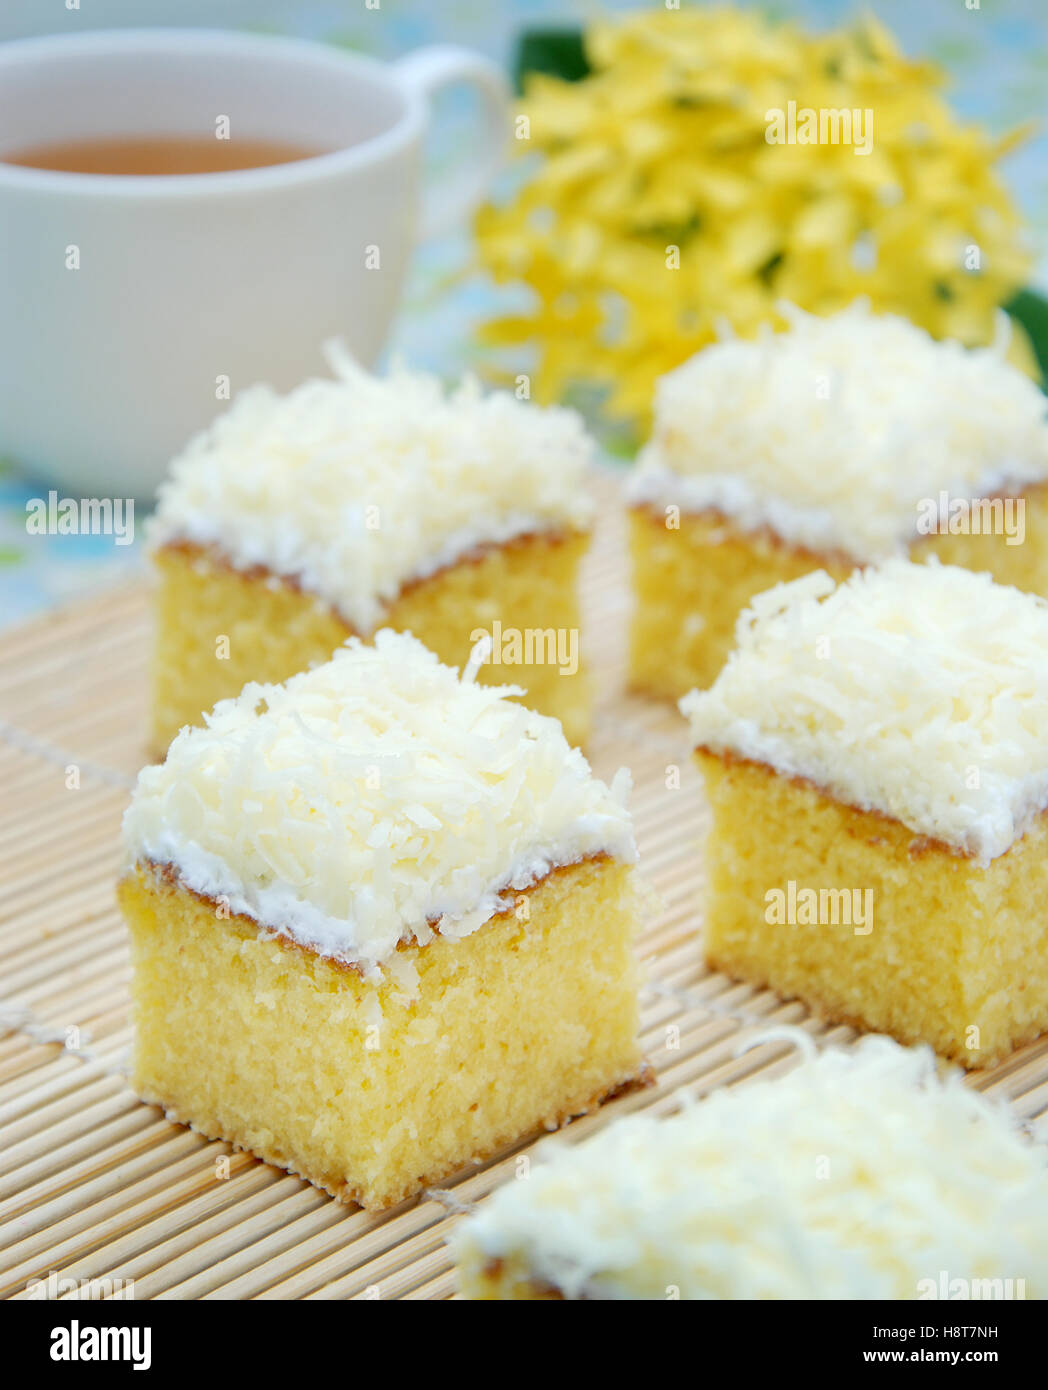 cake with cheese as a toping, with a cup of hot tea as a background Stock Photo